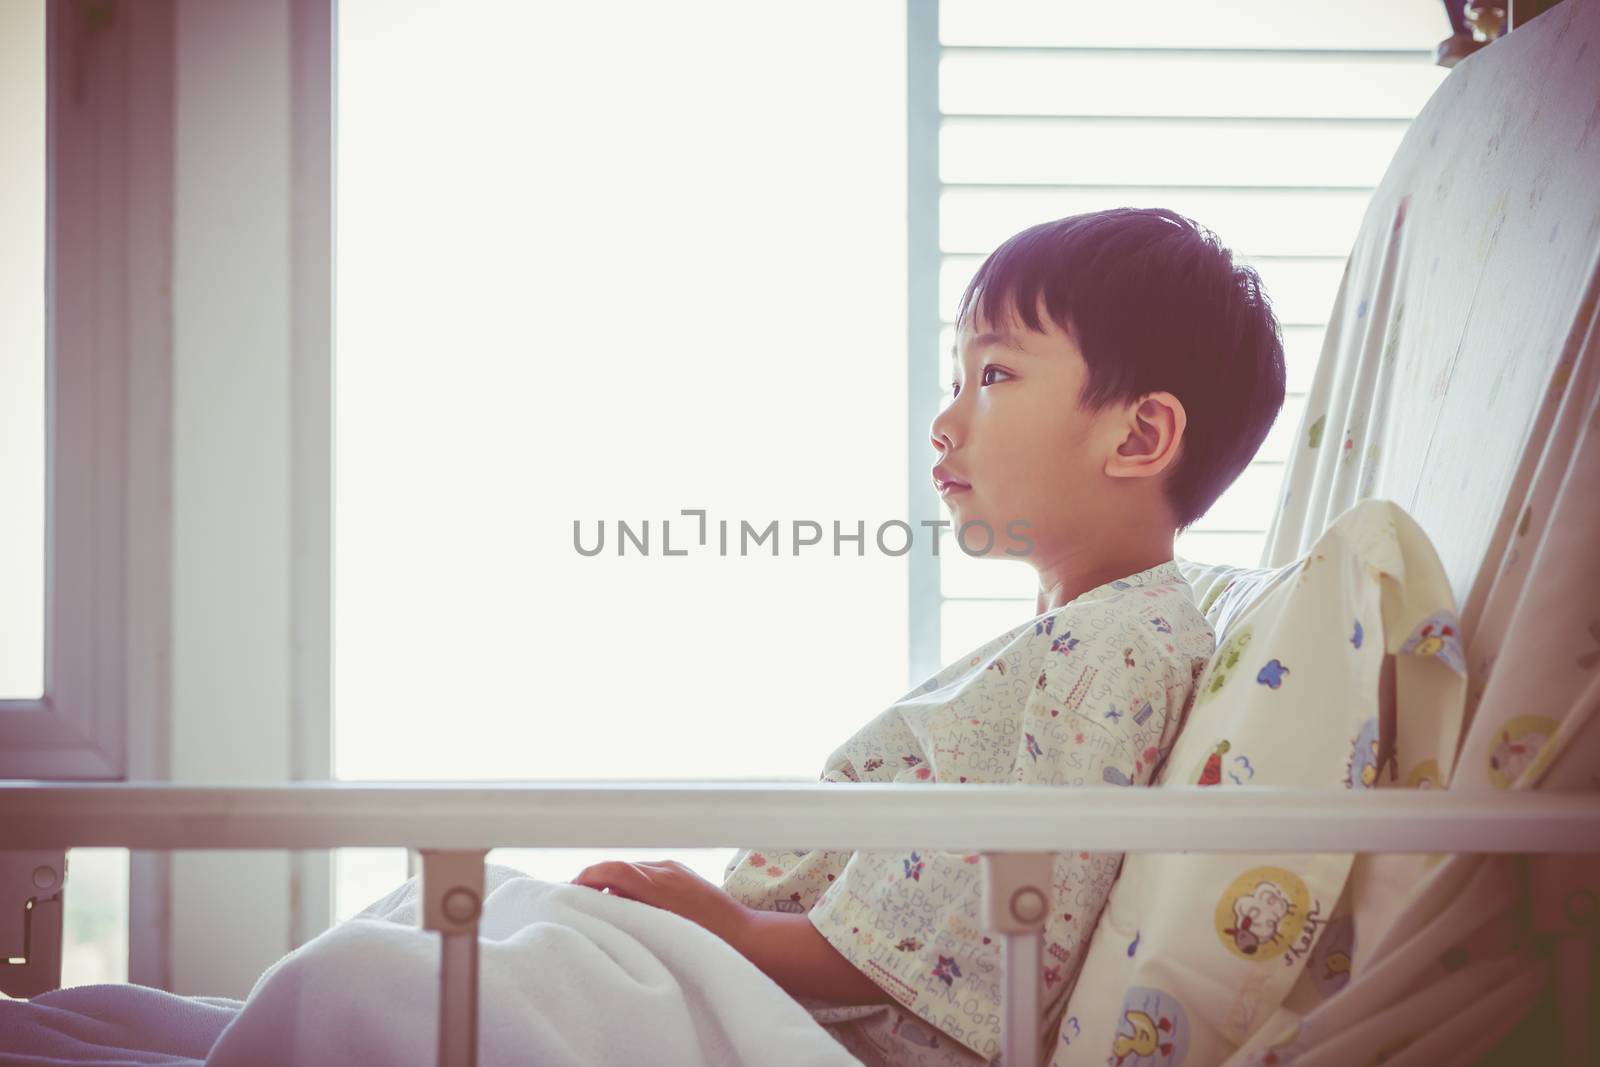 Illness asian child admitted at modern and comfortable equipped hospital room. Health care and people concept. Vignette and vintage style.